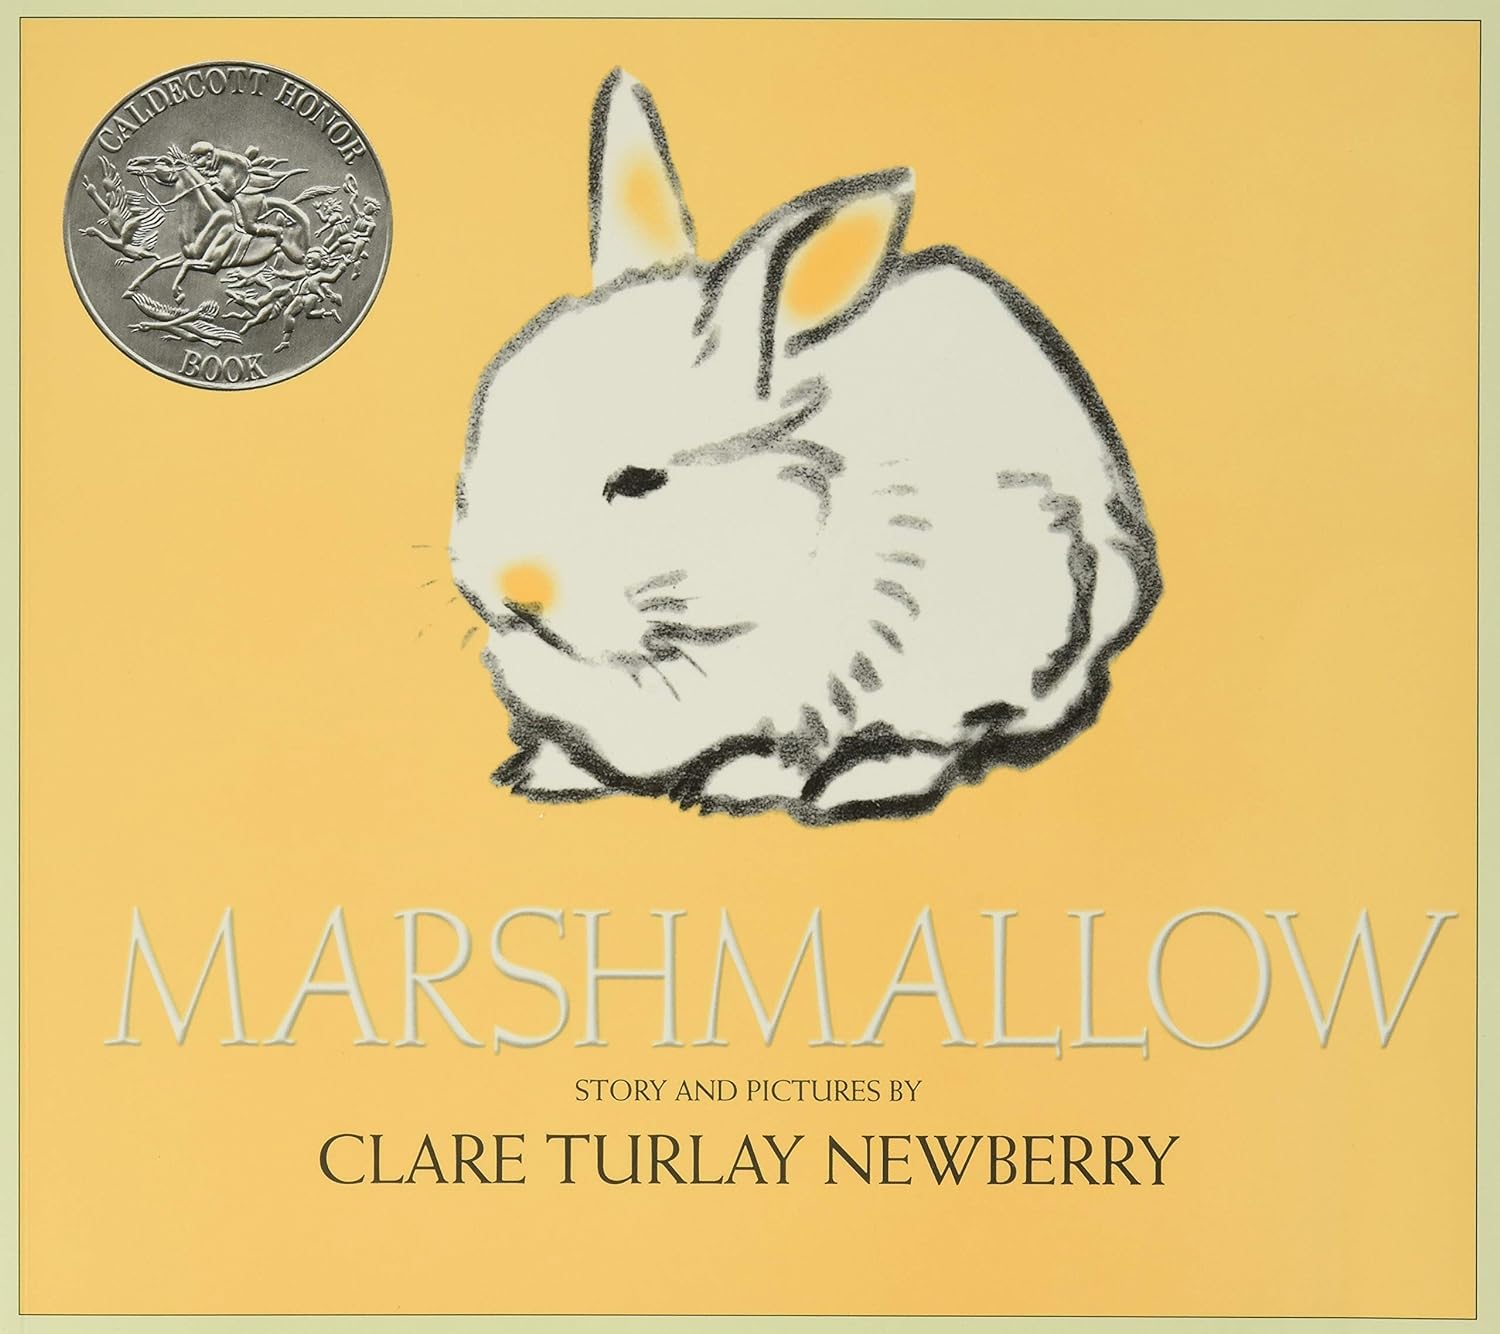 Marshmallow: An Easter And Springtime Book For Kids (Clare Turlay Newberry)